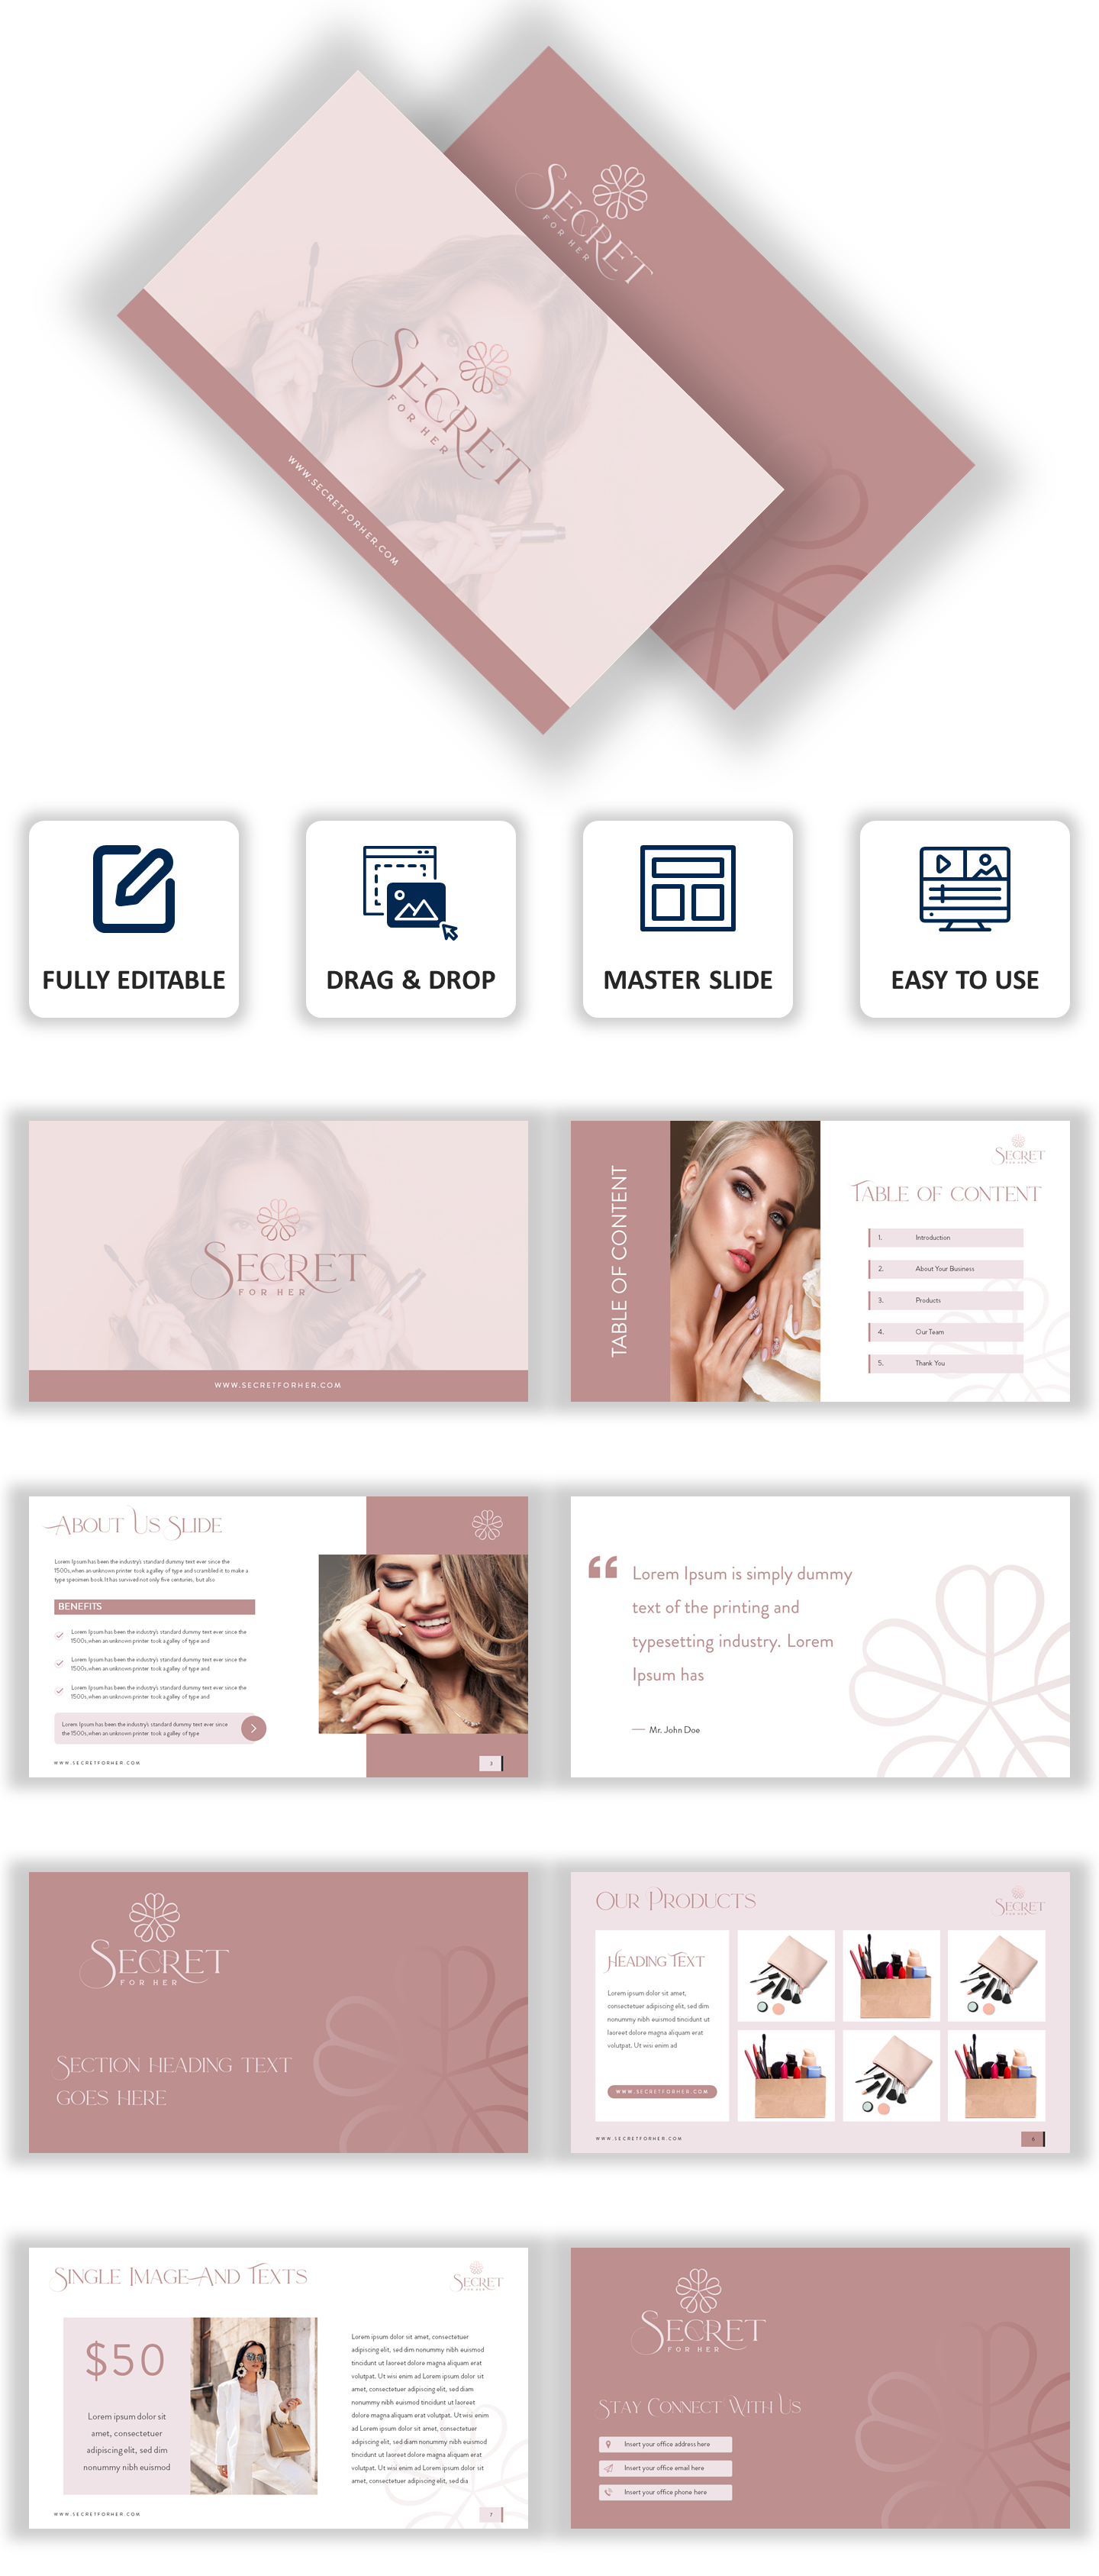 PowerPoint template for an e-commerce business that sells ladies' products